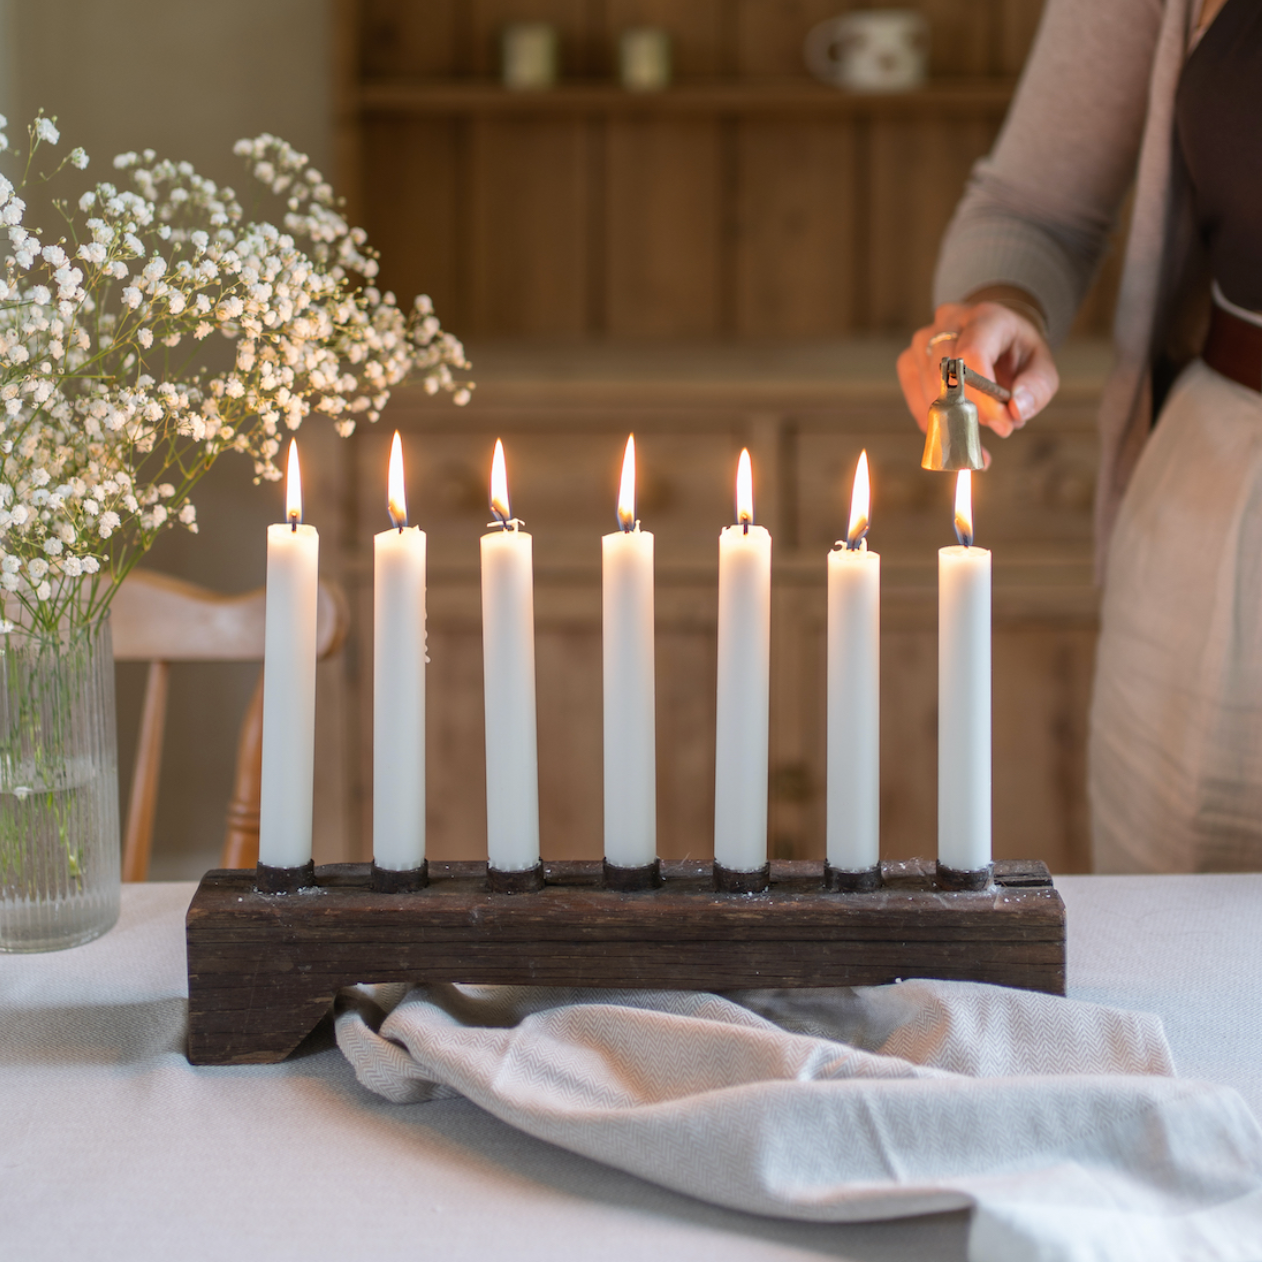 A wooden candle holder holding seven lit dinner candles.